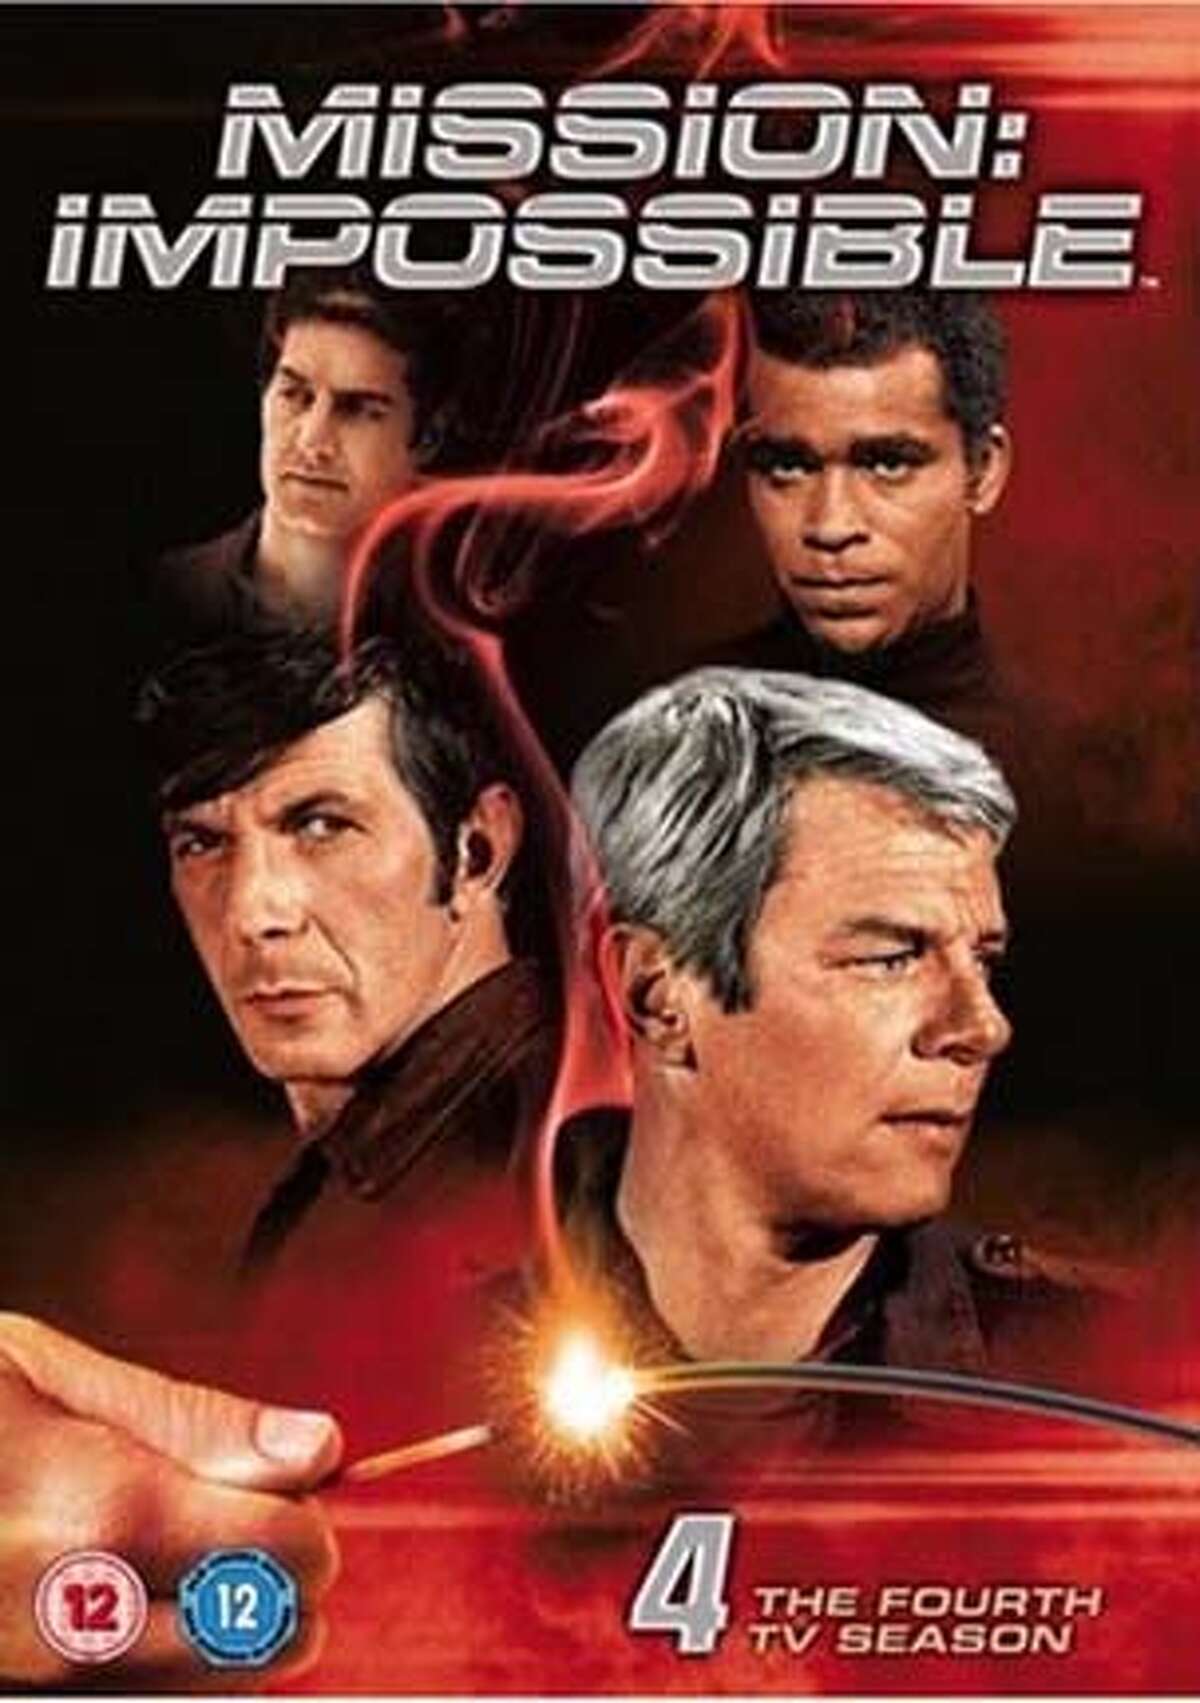 DVD review 'Mission Impossible' Season 4